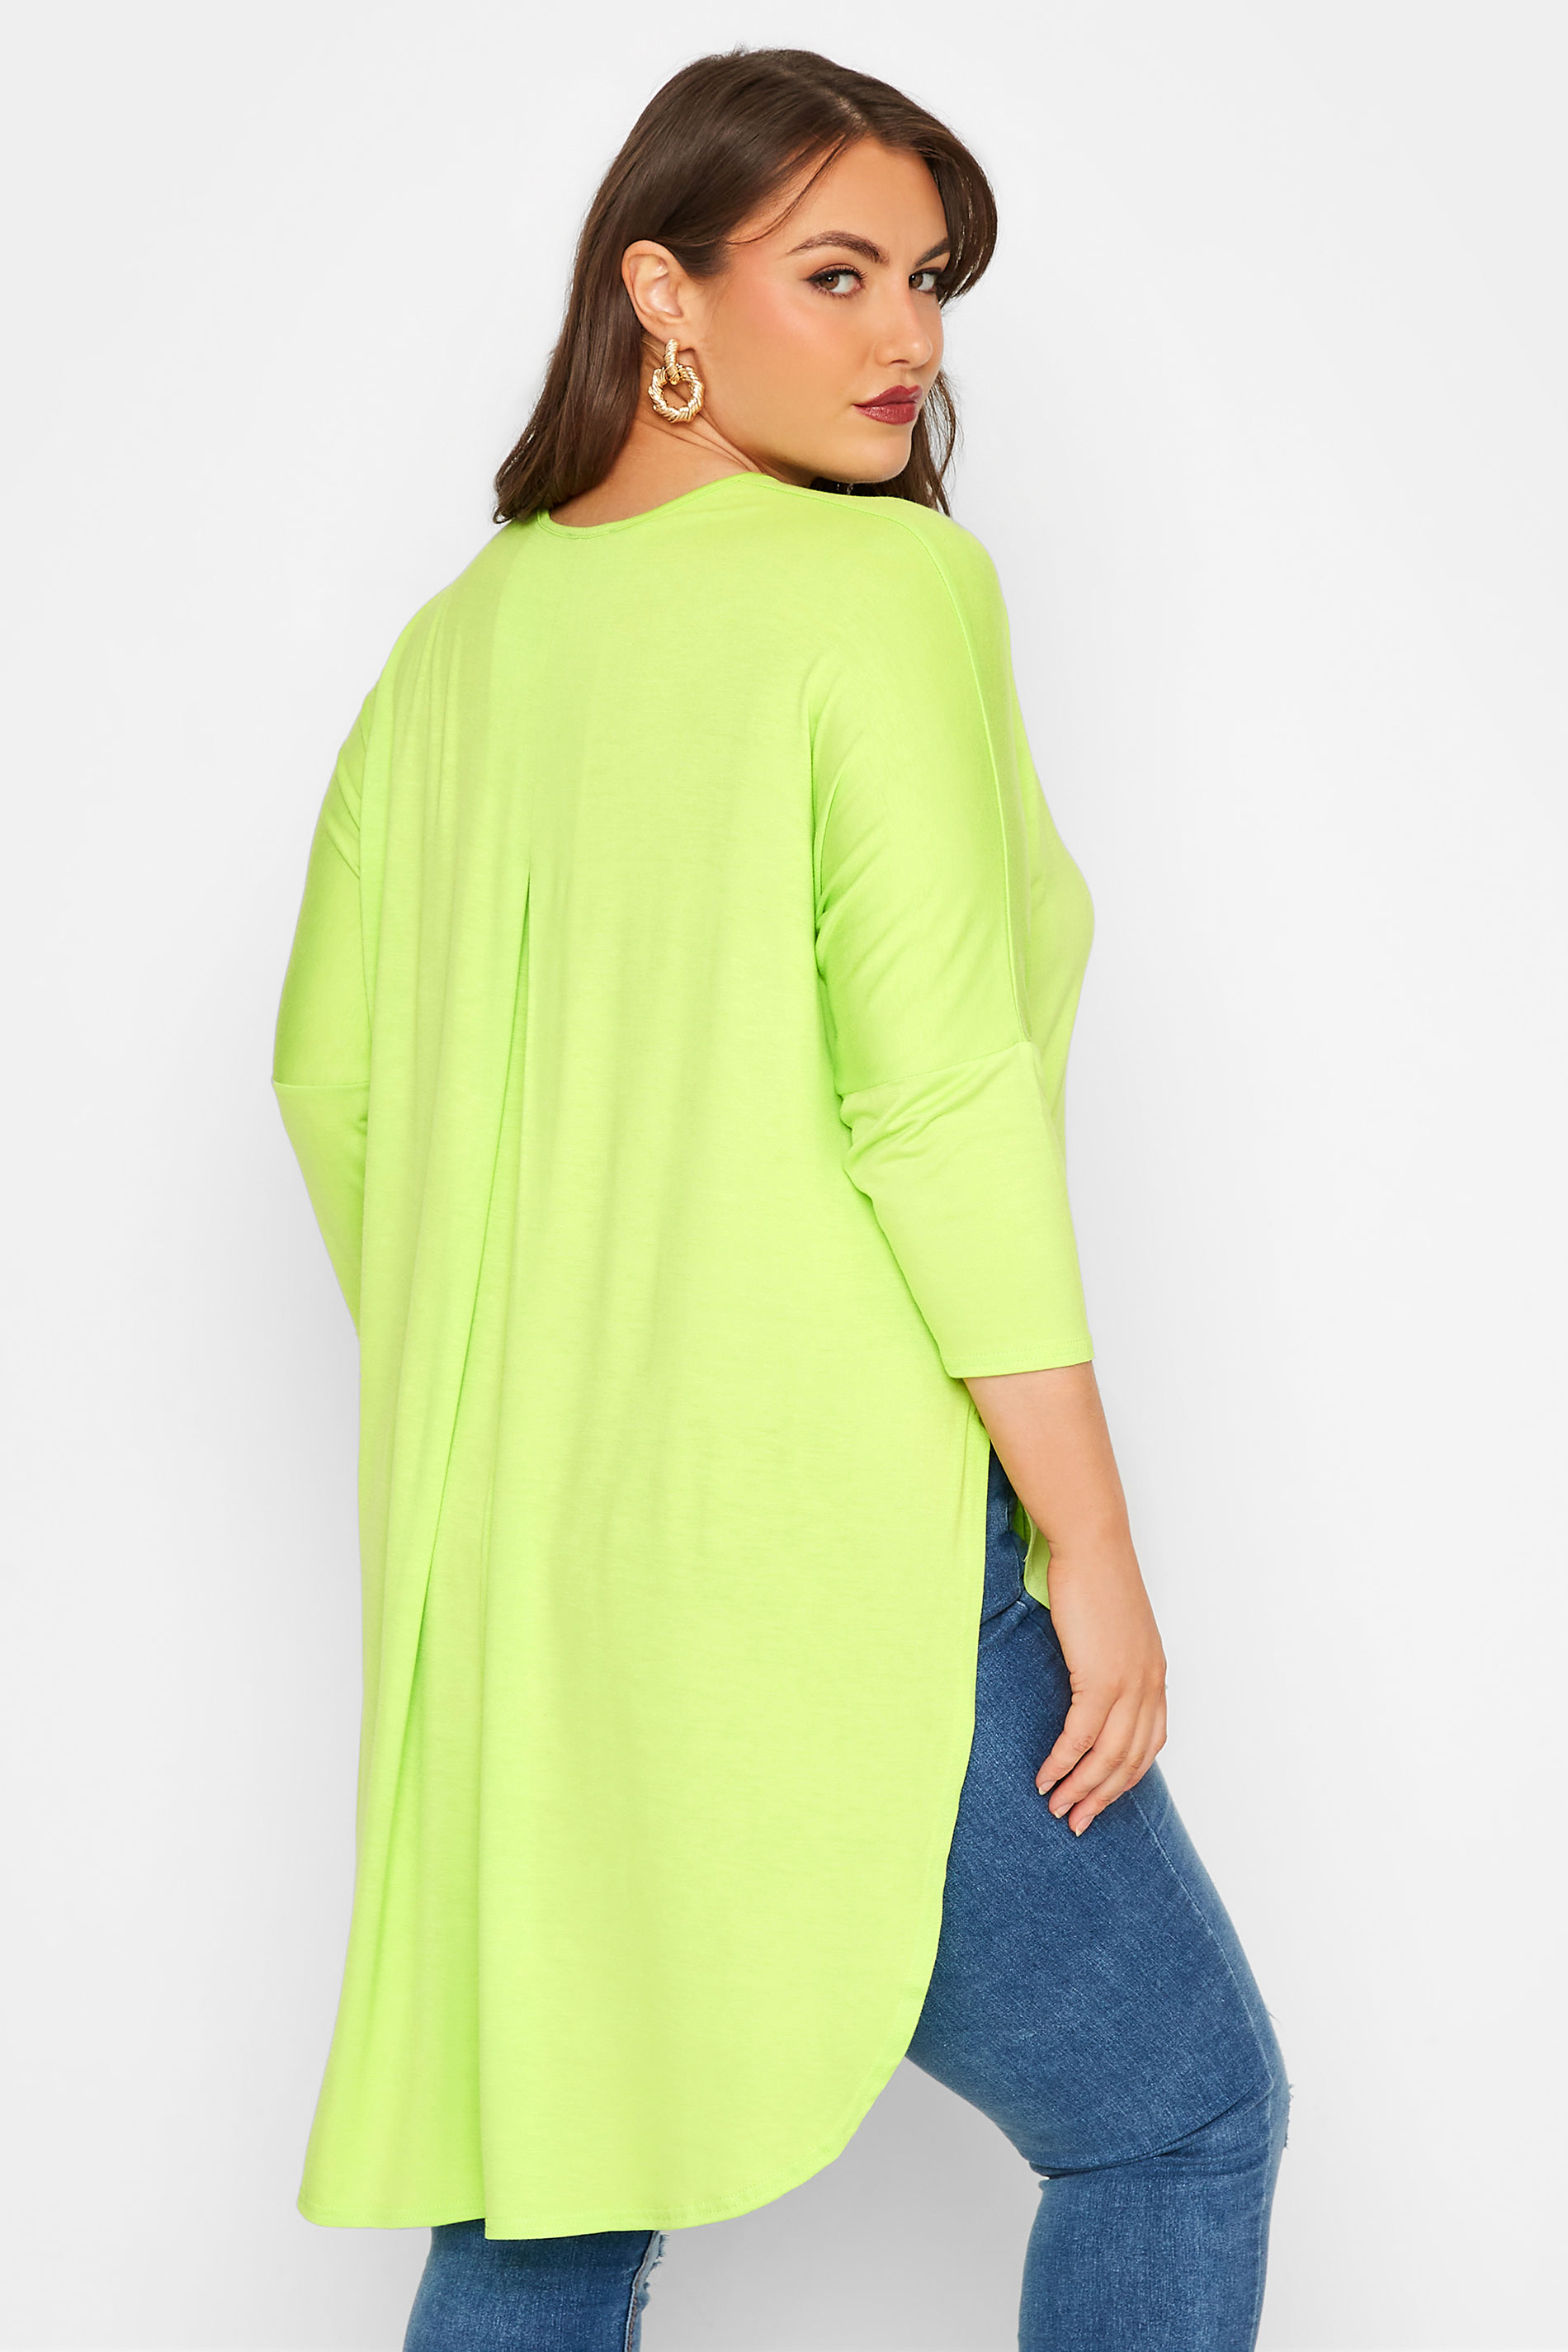 Grande taille  Tops Grande taille  Tops Ourlet Plongeant | LIMITED COLLECTION - T-Shirt Vert Citron Manches Longues Ourlet Plongeant - MD45183